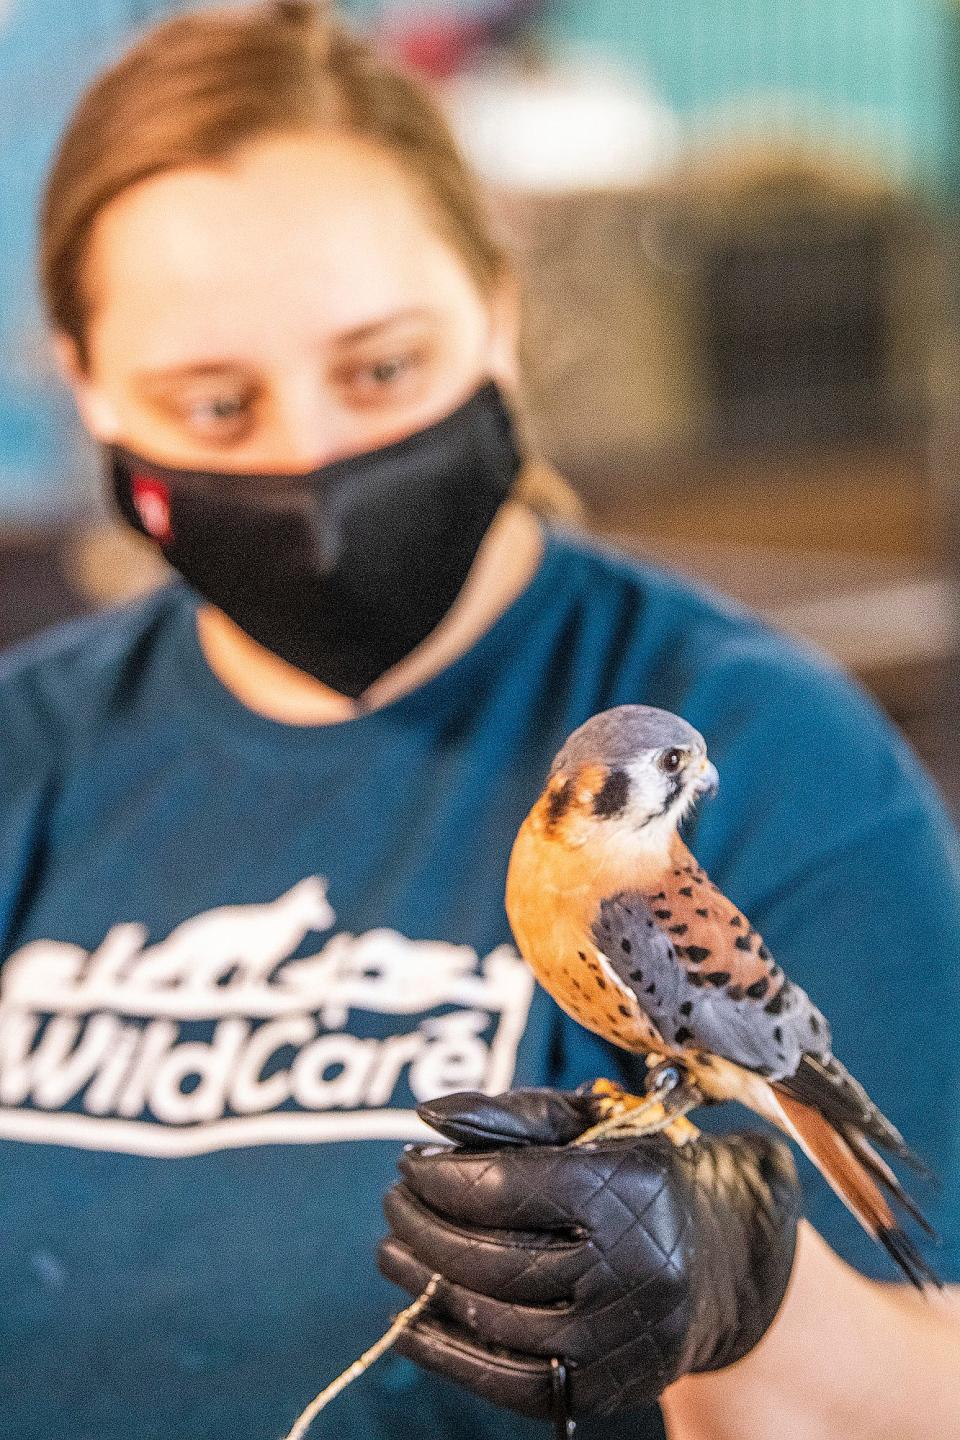 Director of Animal Care Sarah Maddox spends time with Felix, an American kestrel, at WildCare Inc. on July 7, 2021. Felix was one of the animals at last year's WildCare Inc. Benefit at Butler Winery and Vineyard.